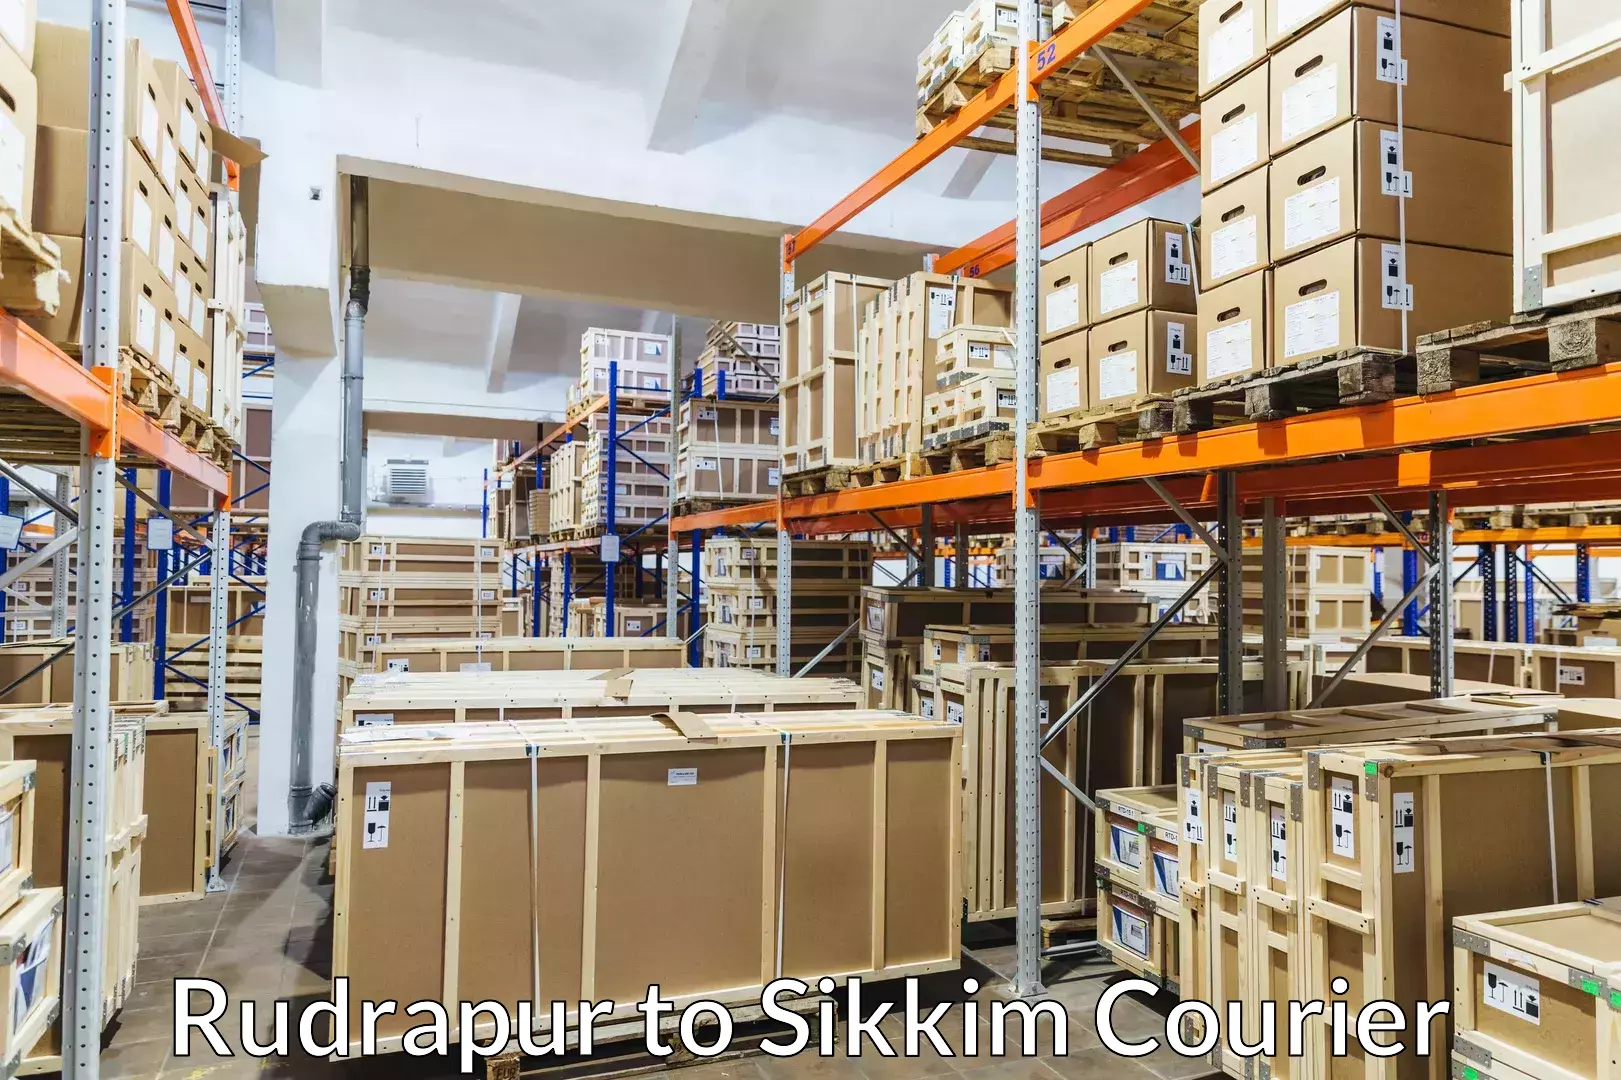 Luggage shipment specialists Rudrapur to Sikkim